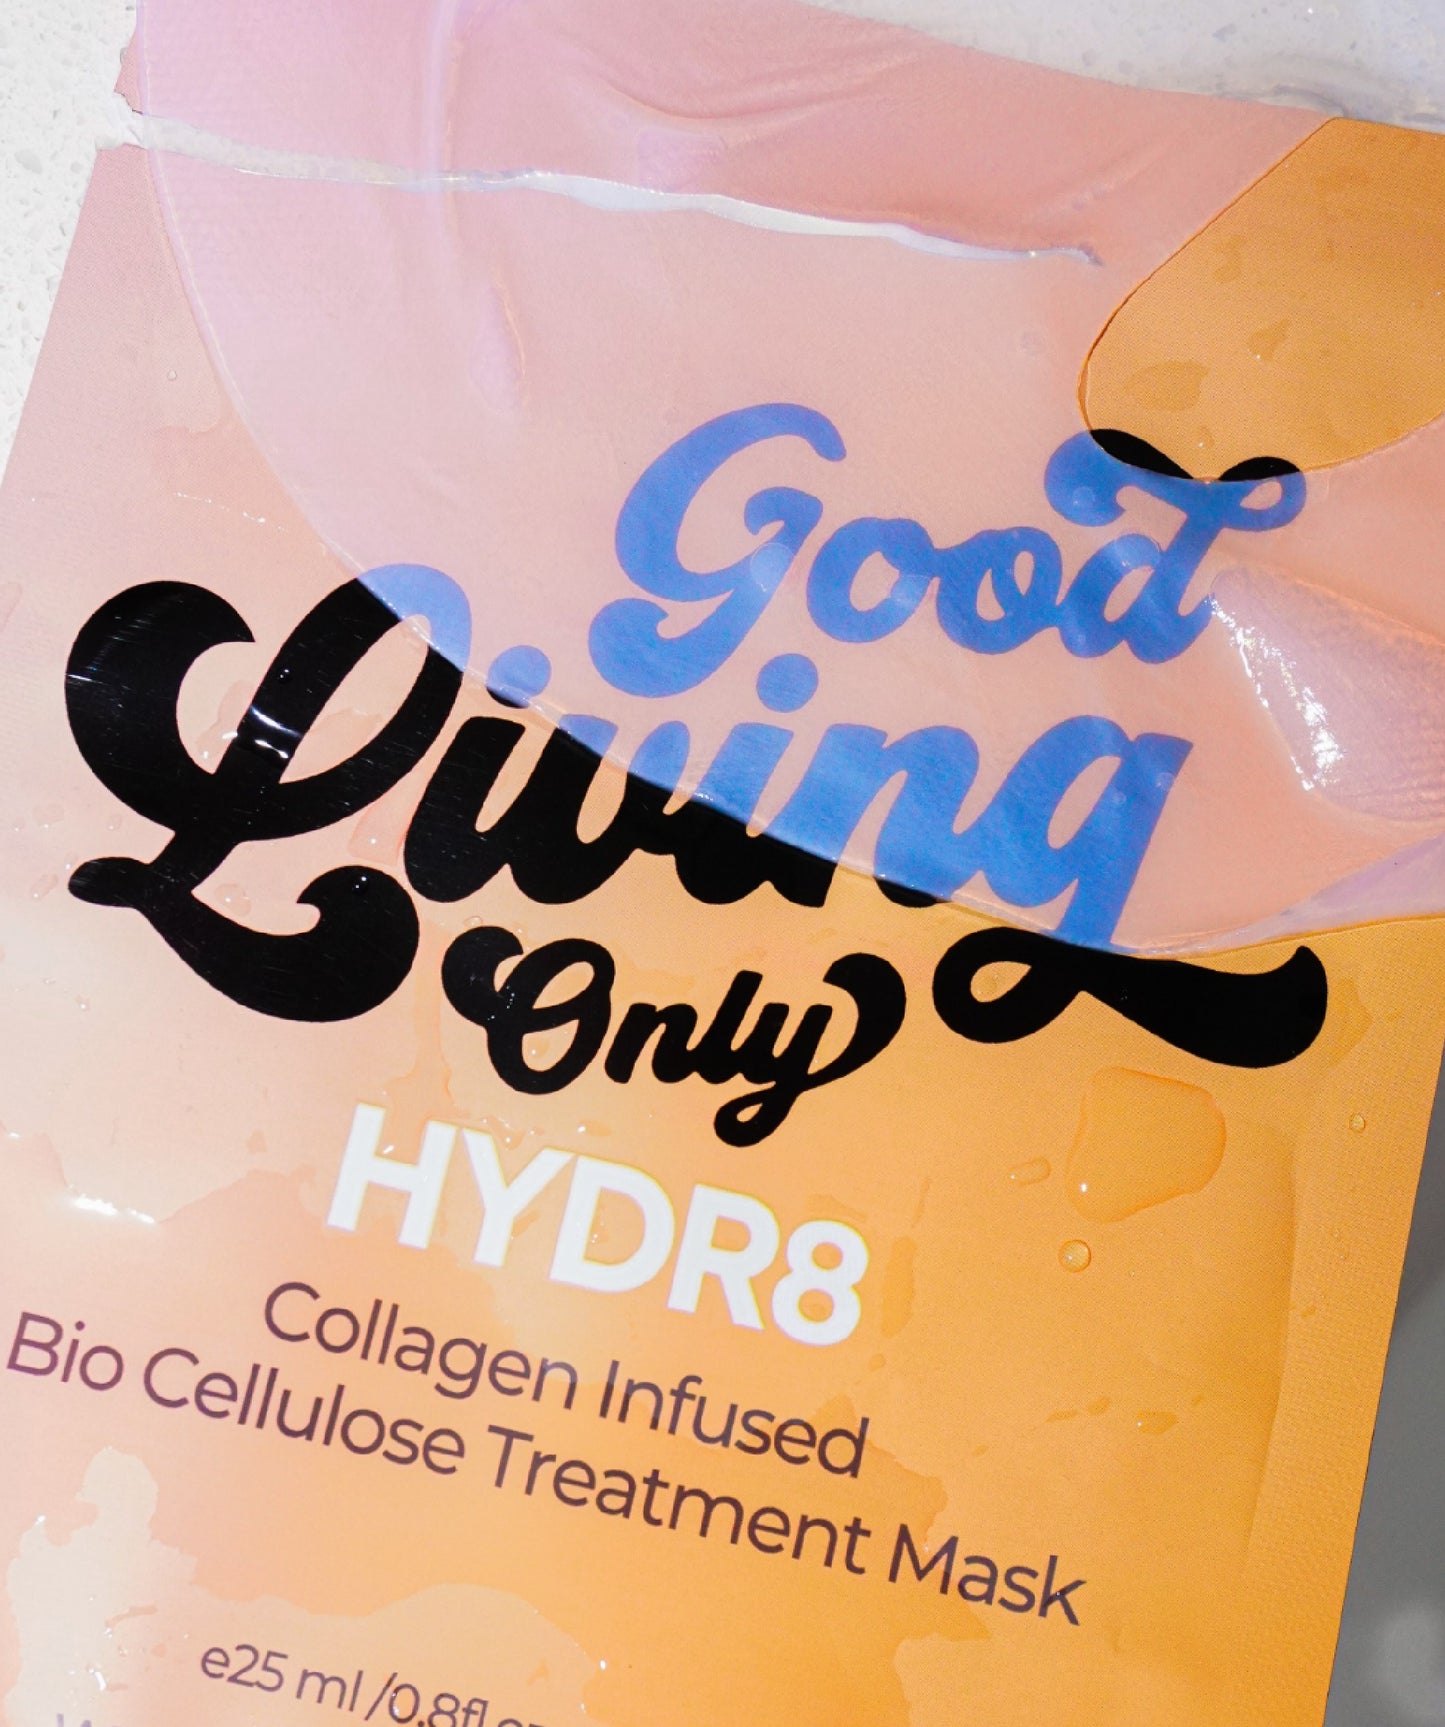 HYDR8 - Collagen Infused Bio Cellulose Treatment Mask